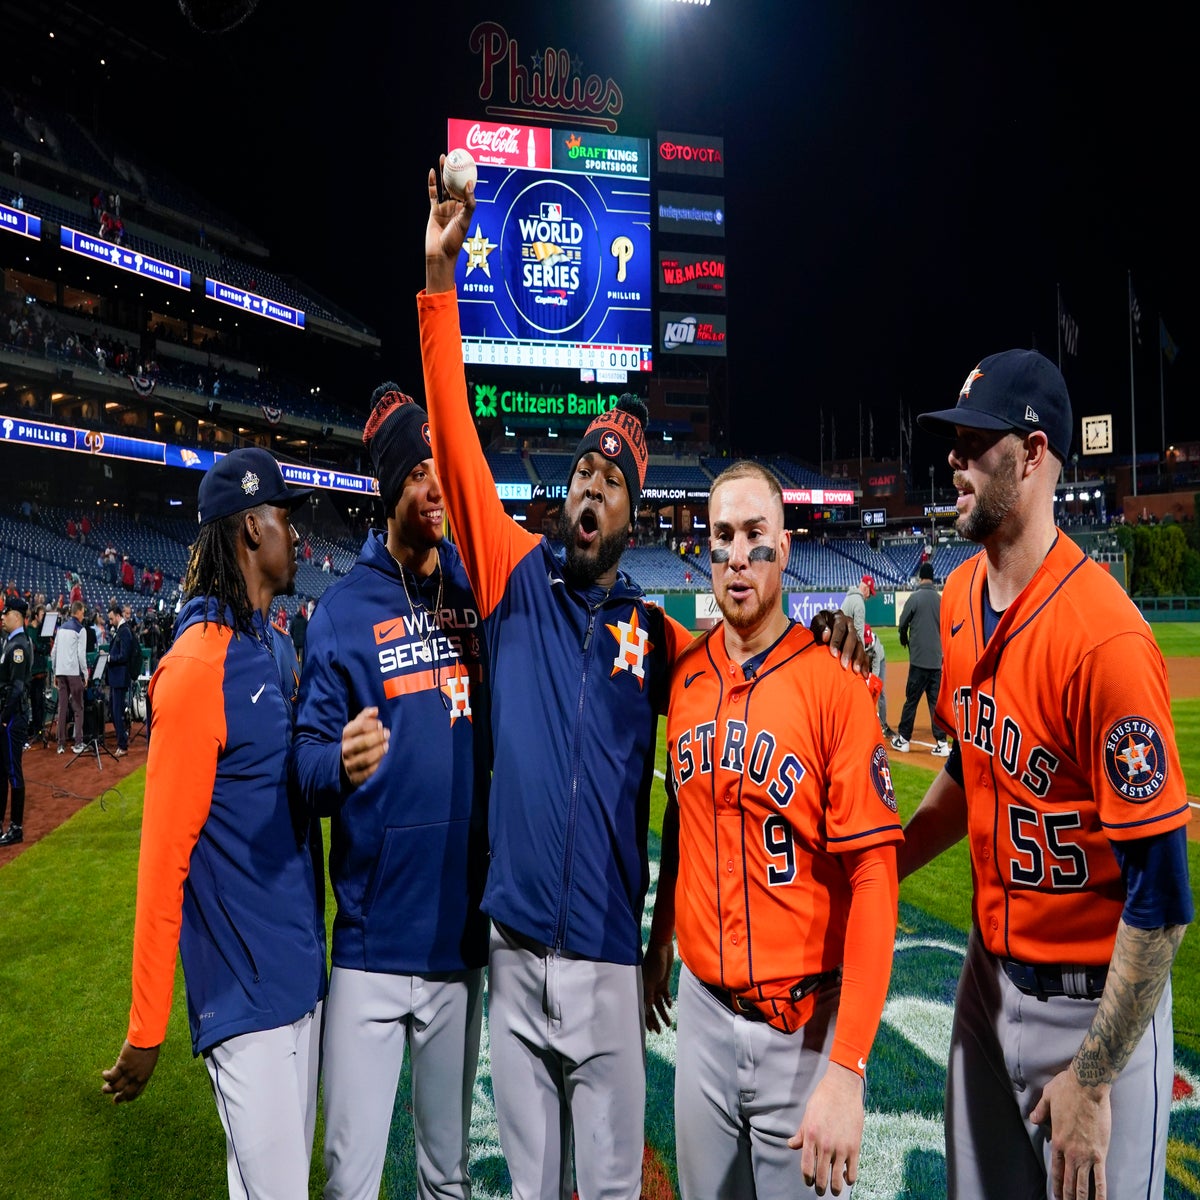 World Series Baseball 2022: Why the Astros don't need to be liked